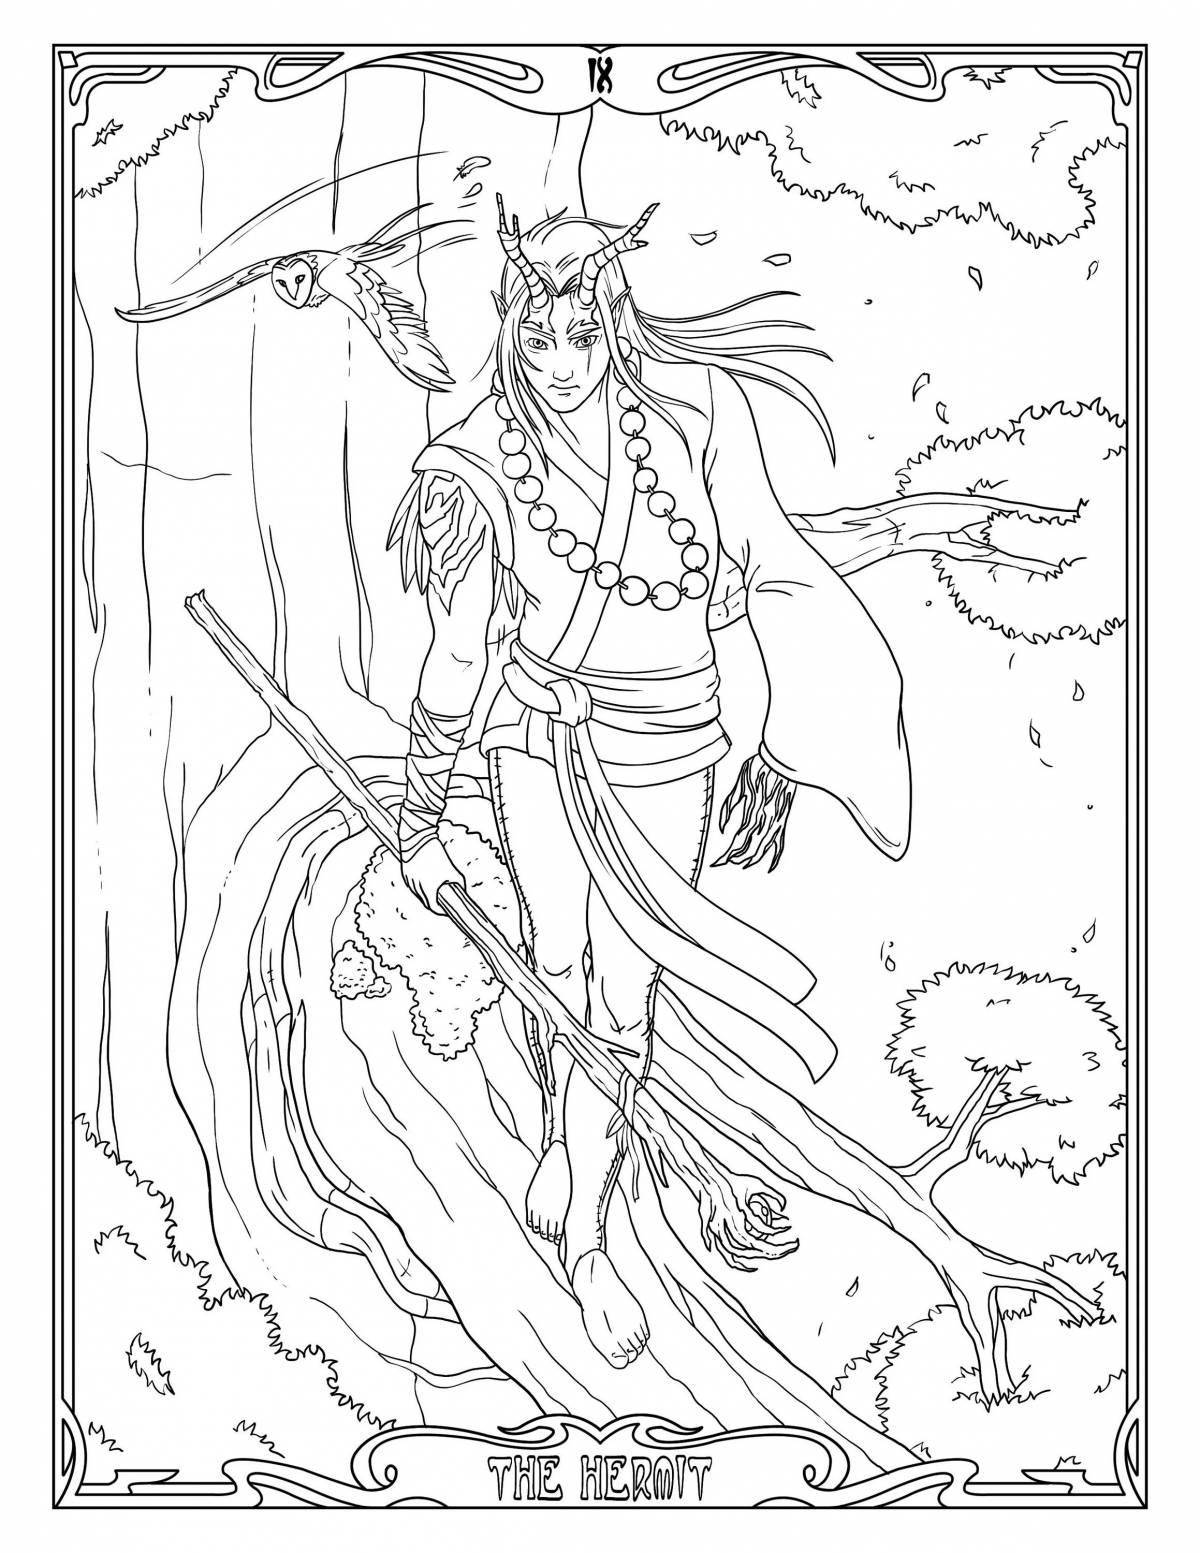 Awesome tarot card coloring pages